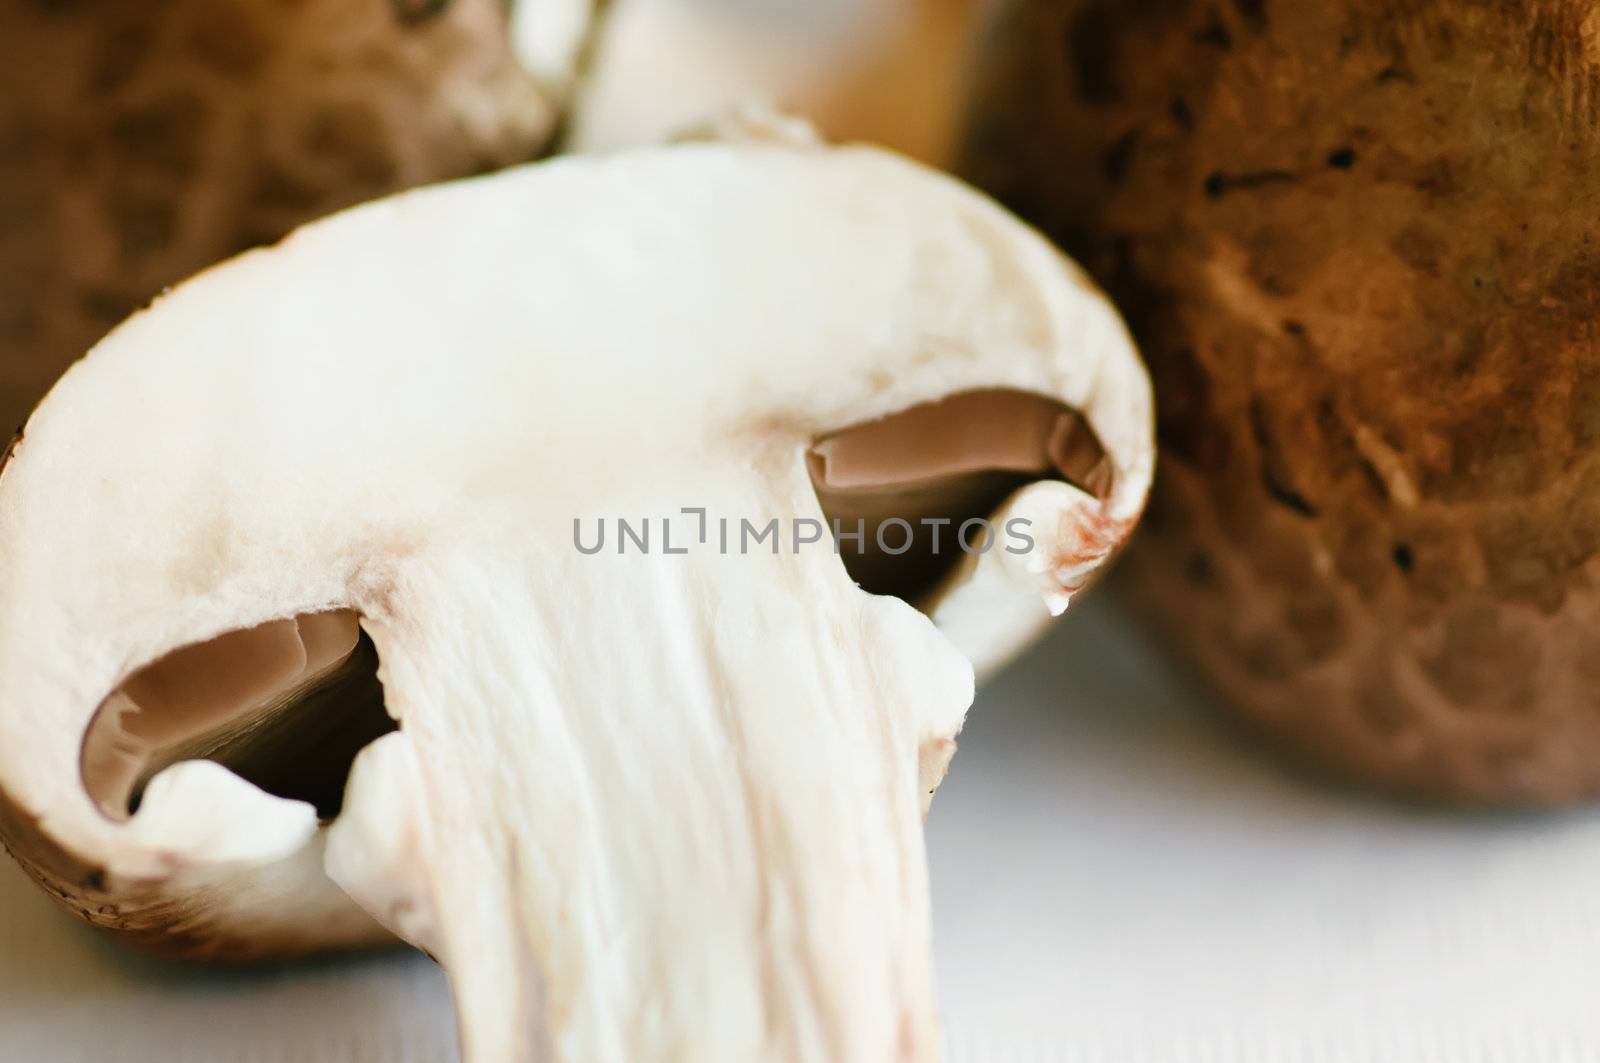 raw mushrooms (champignons) on a white table